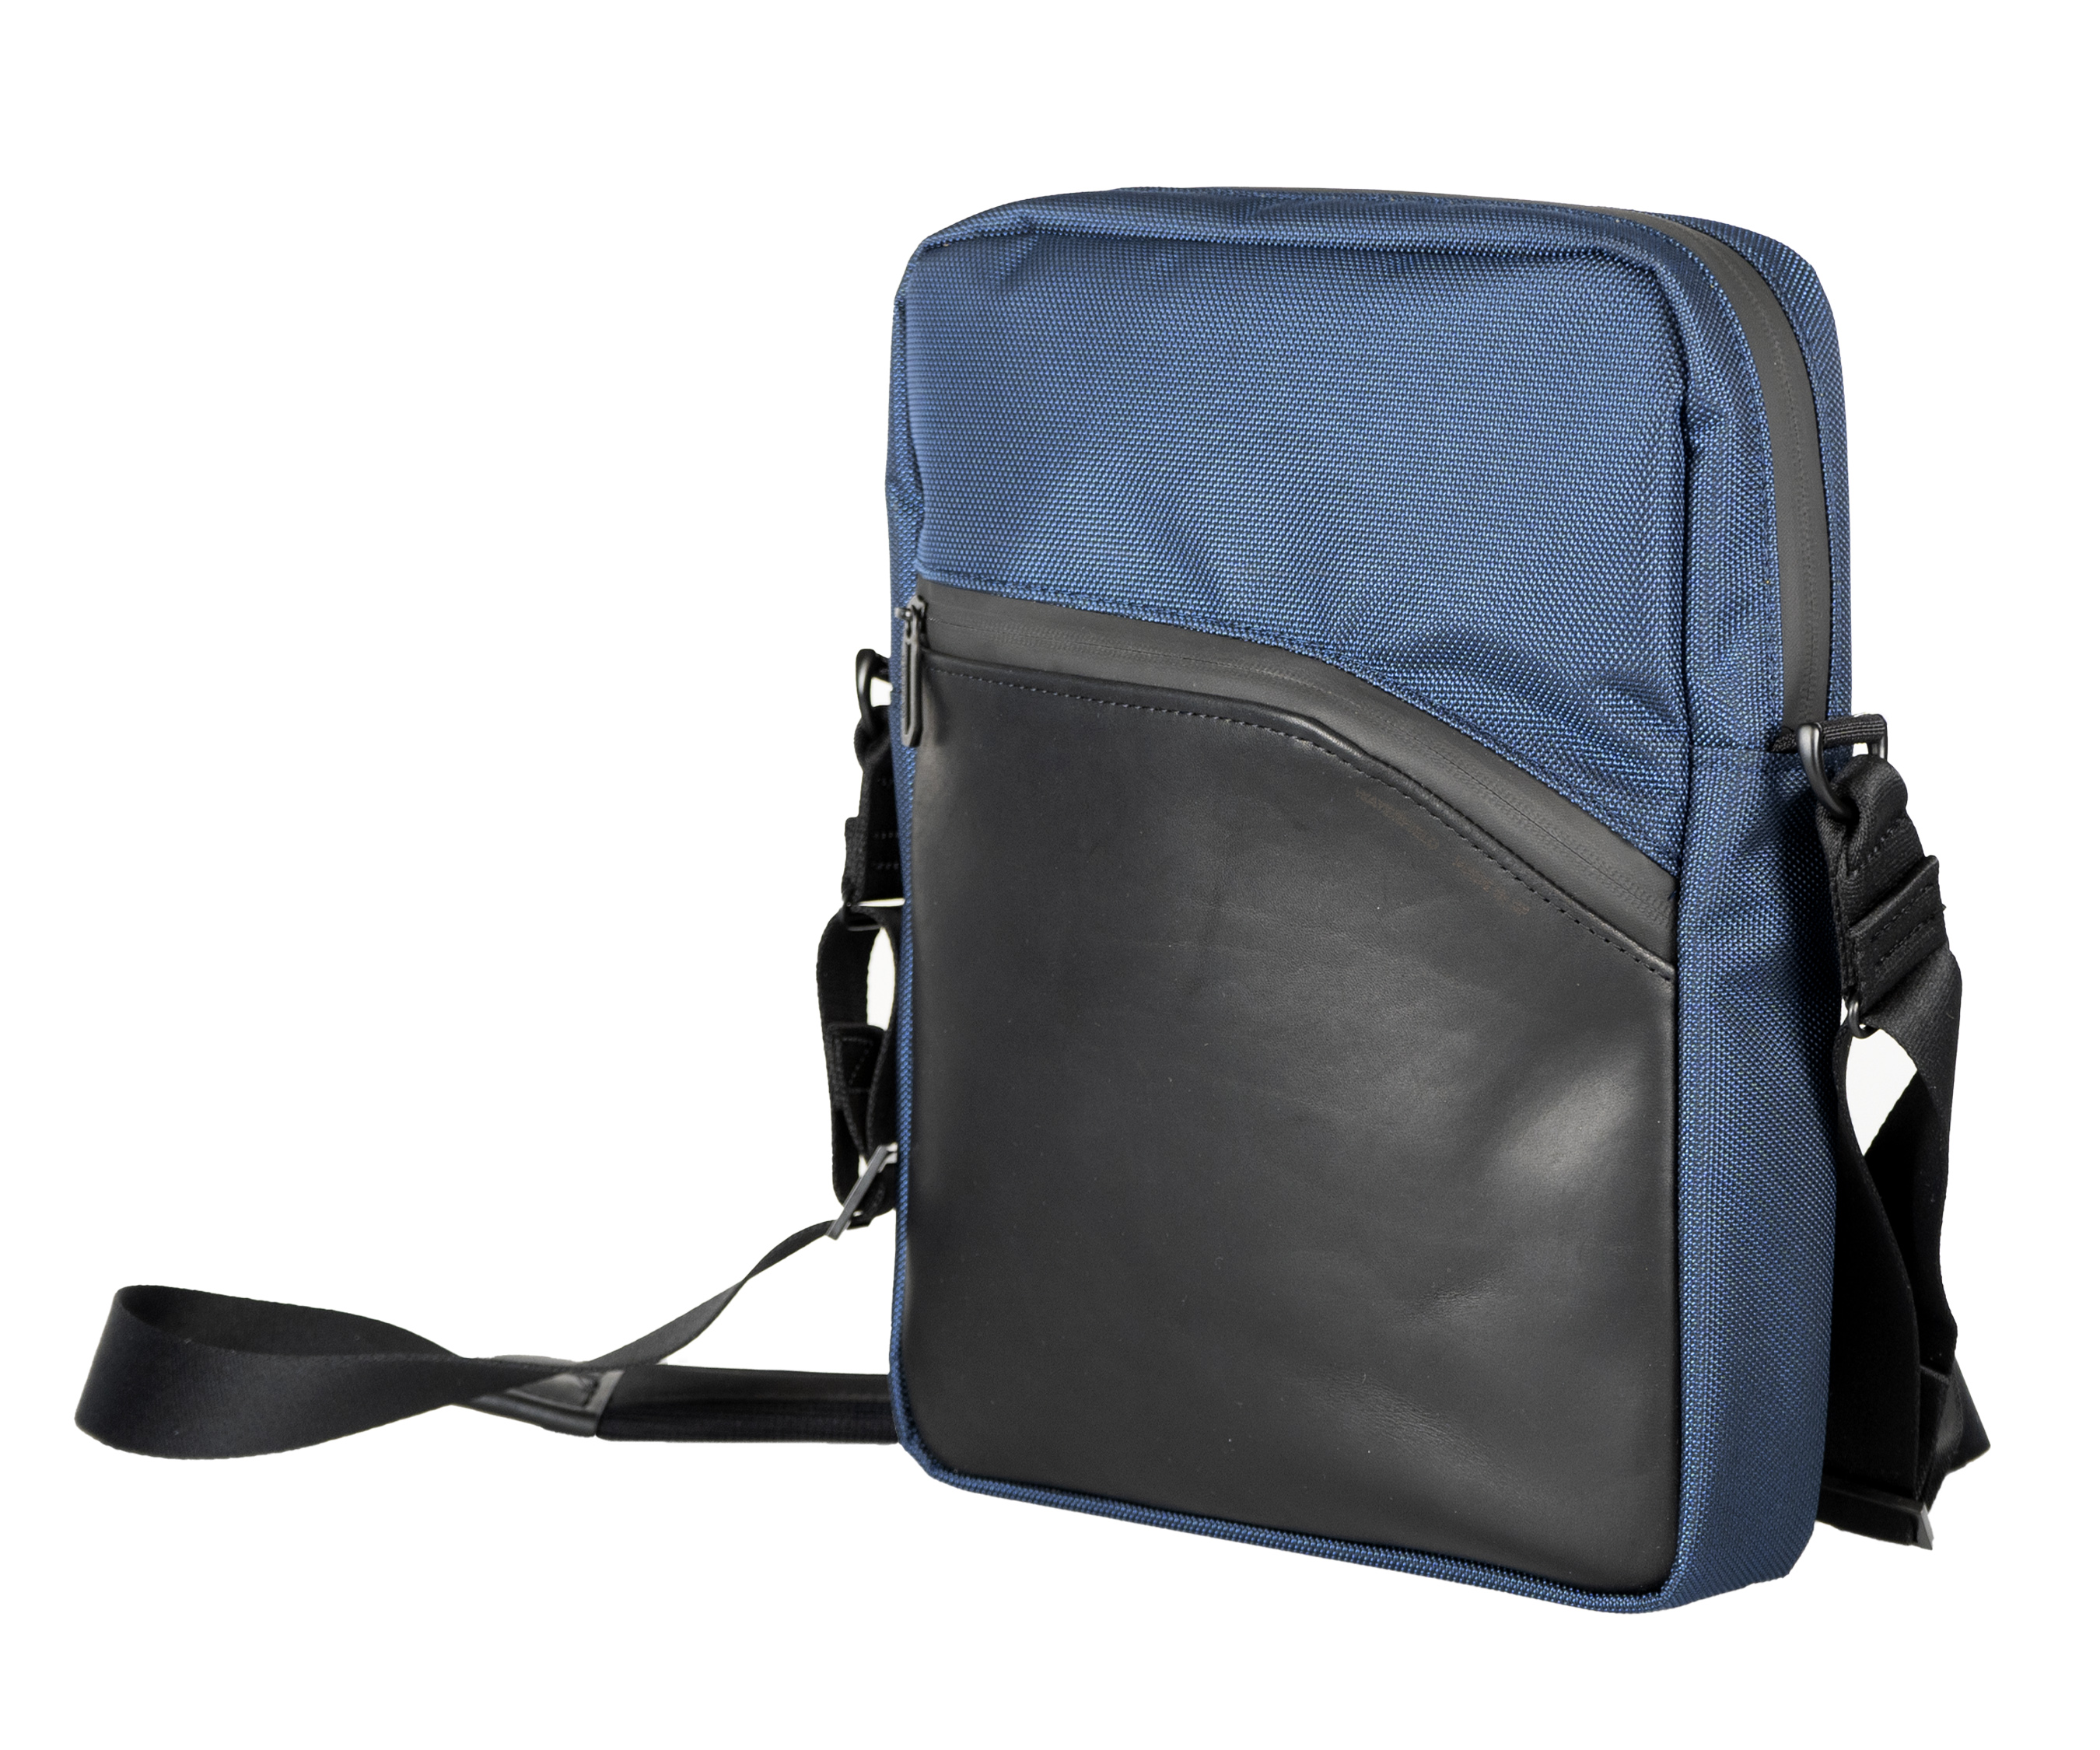 Crossbody bag in blue Forza textile and full-grain leather